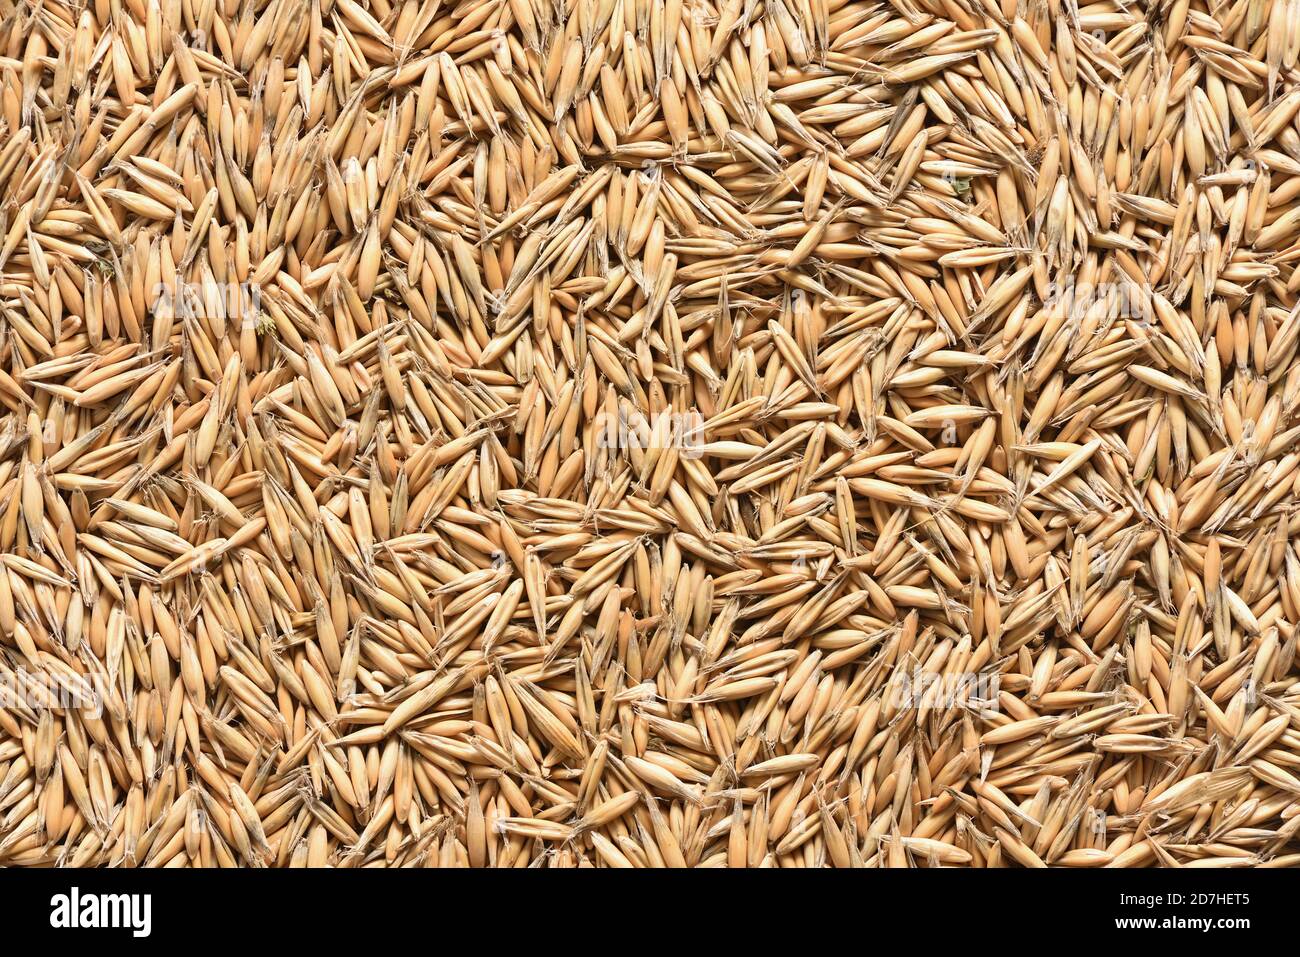 Oats, full frame coverage as background and texture Stock Photo